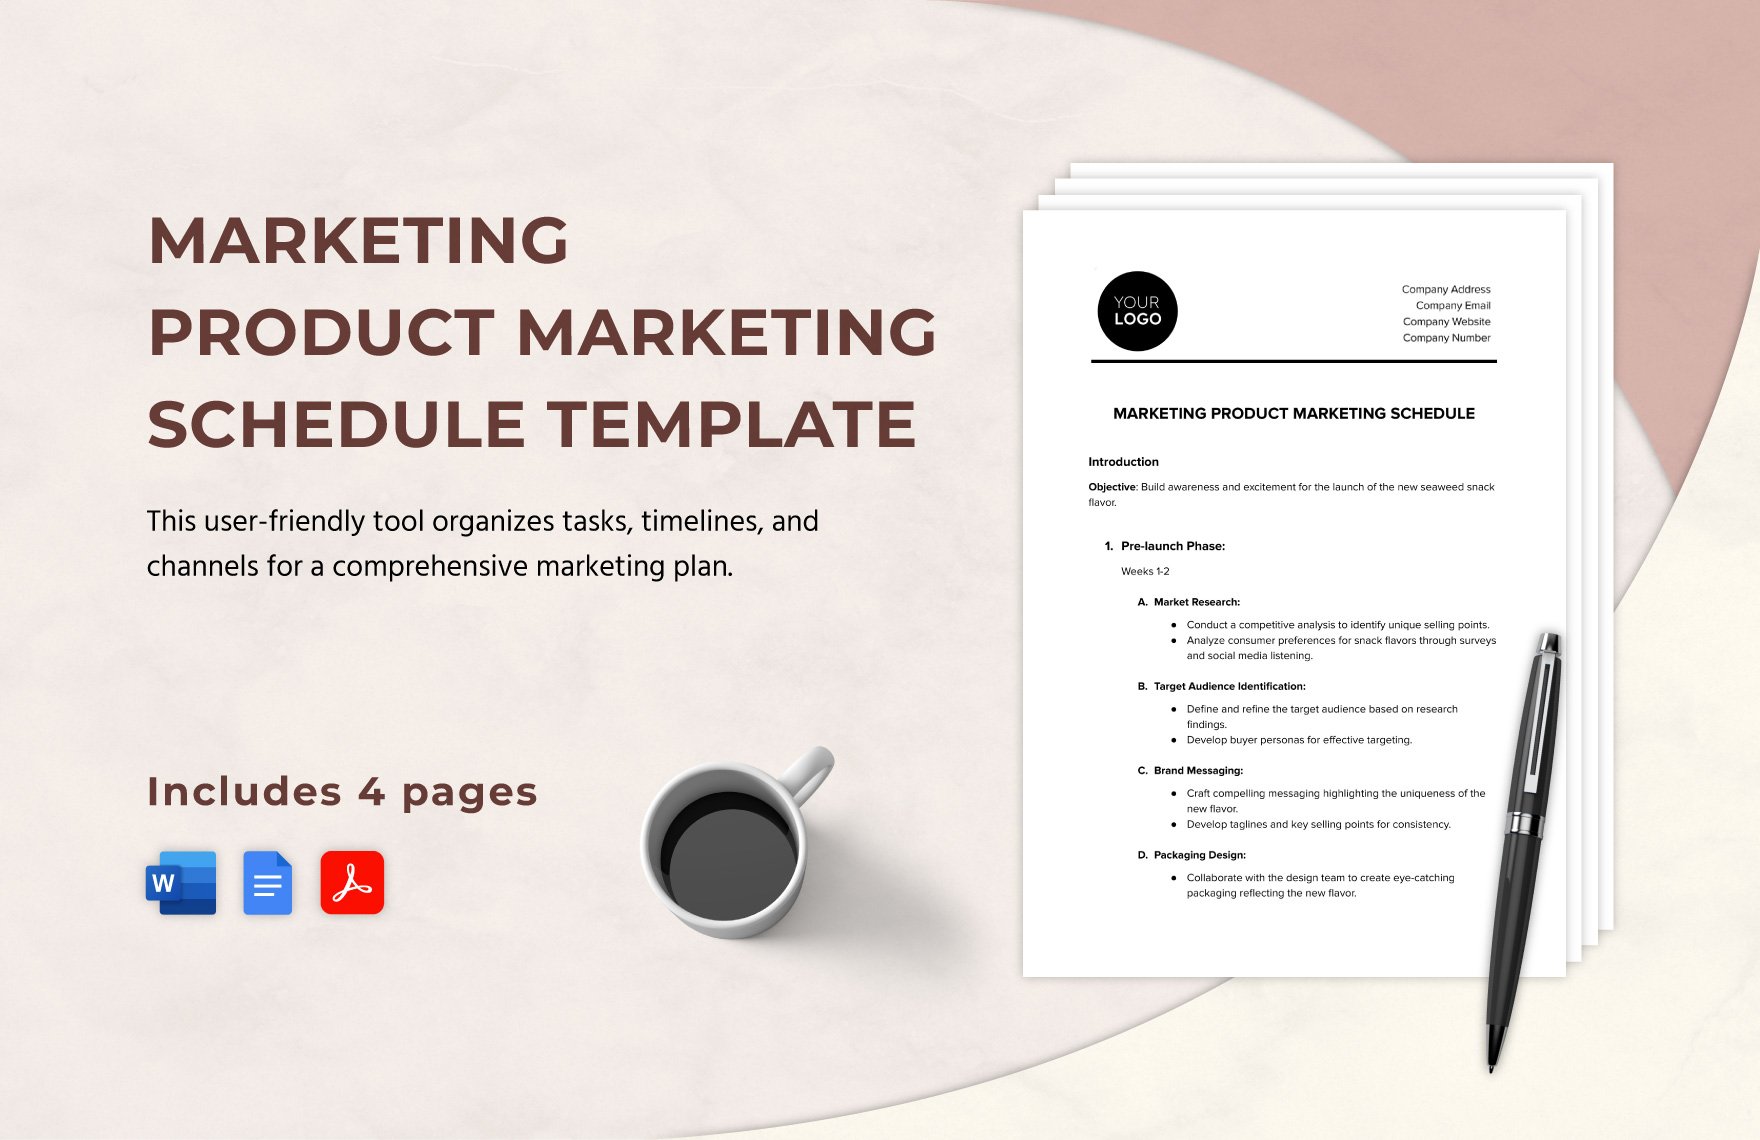 Marketing Product Marketing Schedule Template in Word, Google Docs, PDF